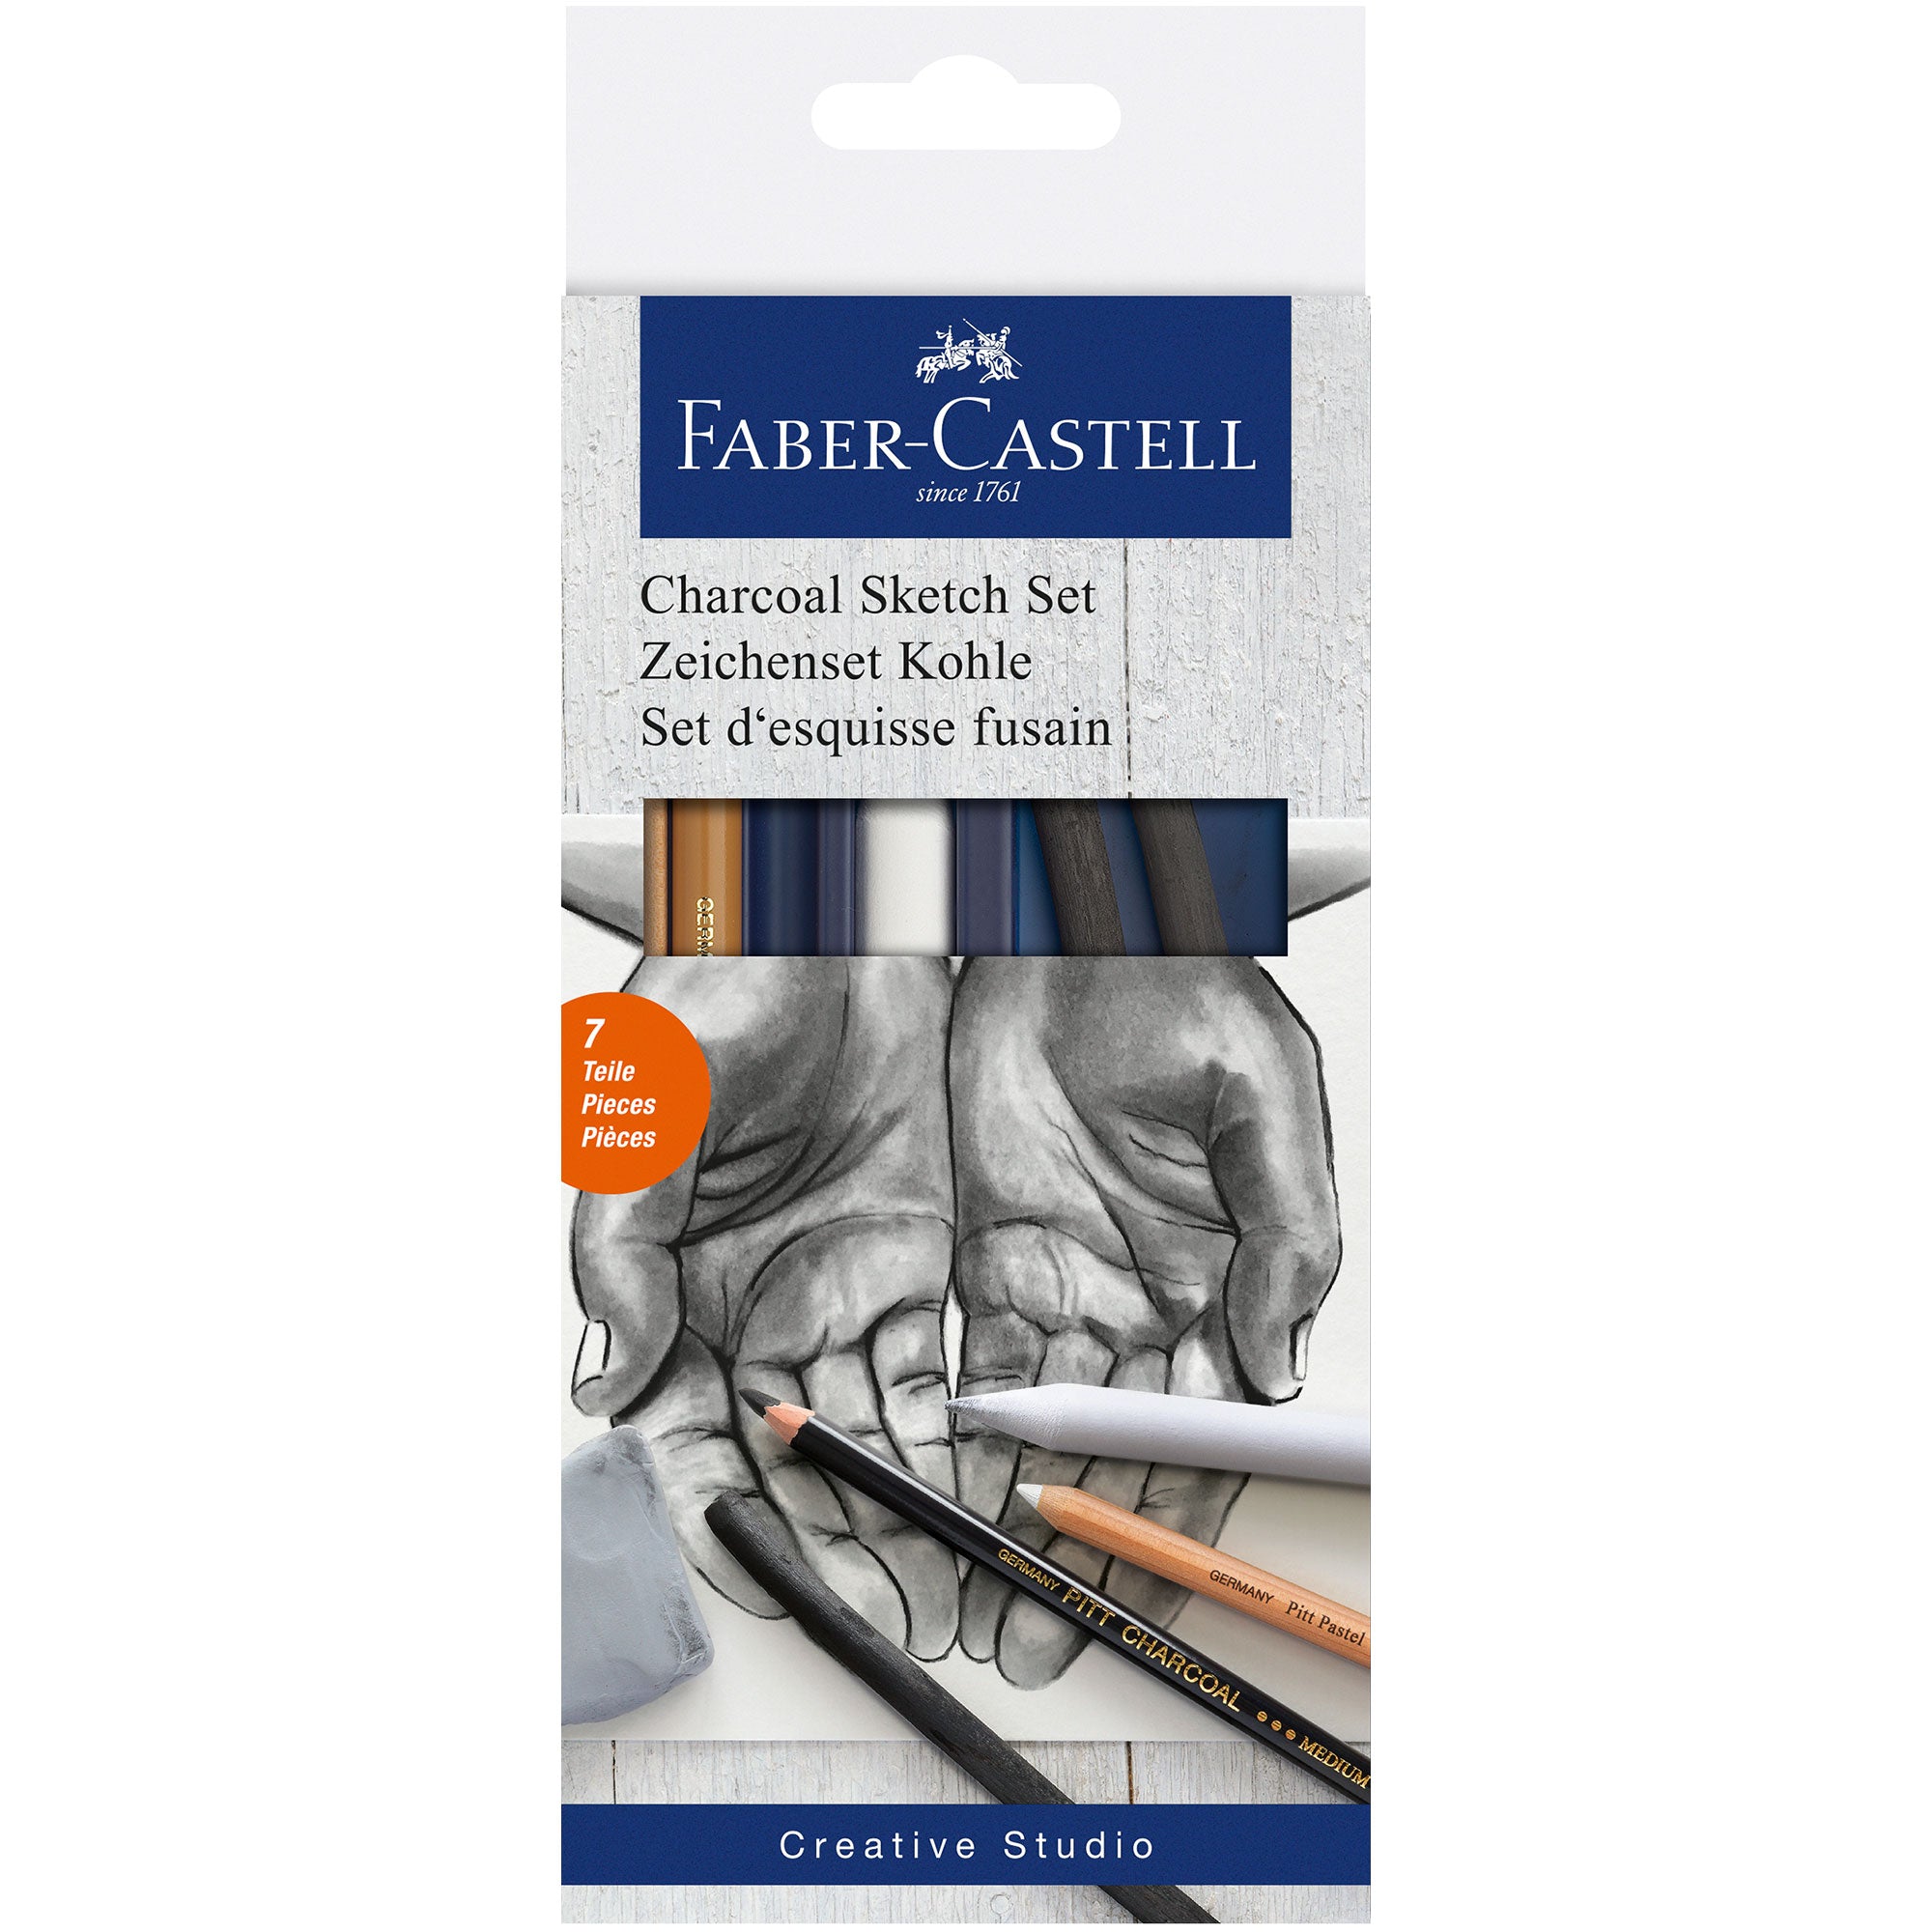 Faber-Castell Charcoal Sketch Set - Box